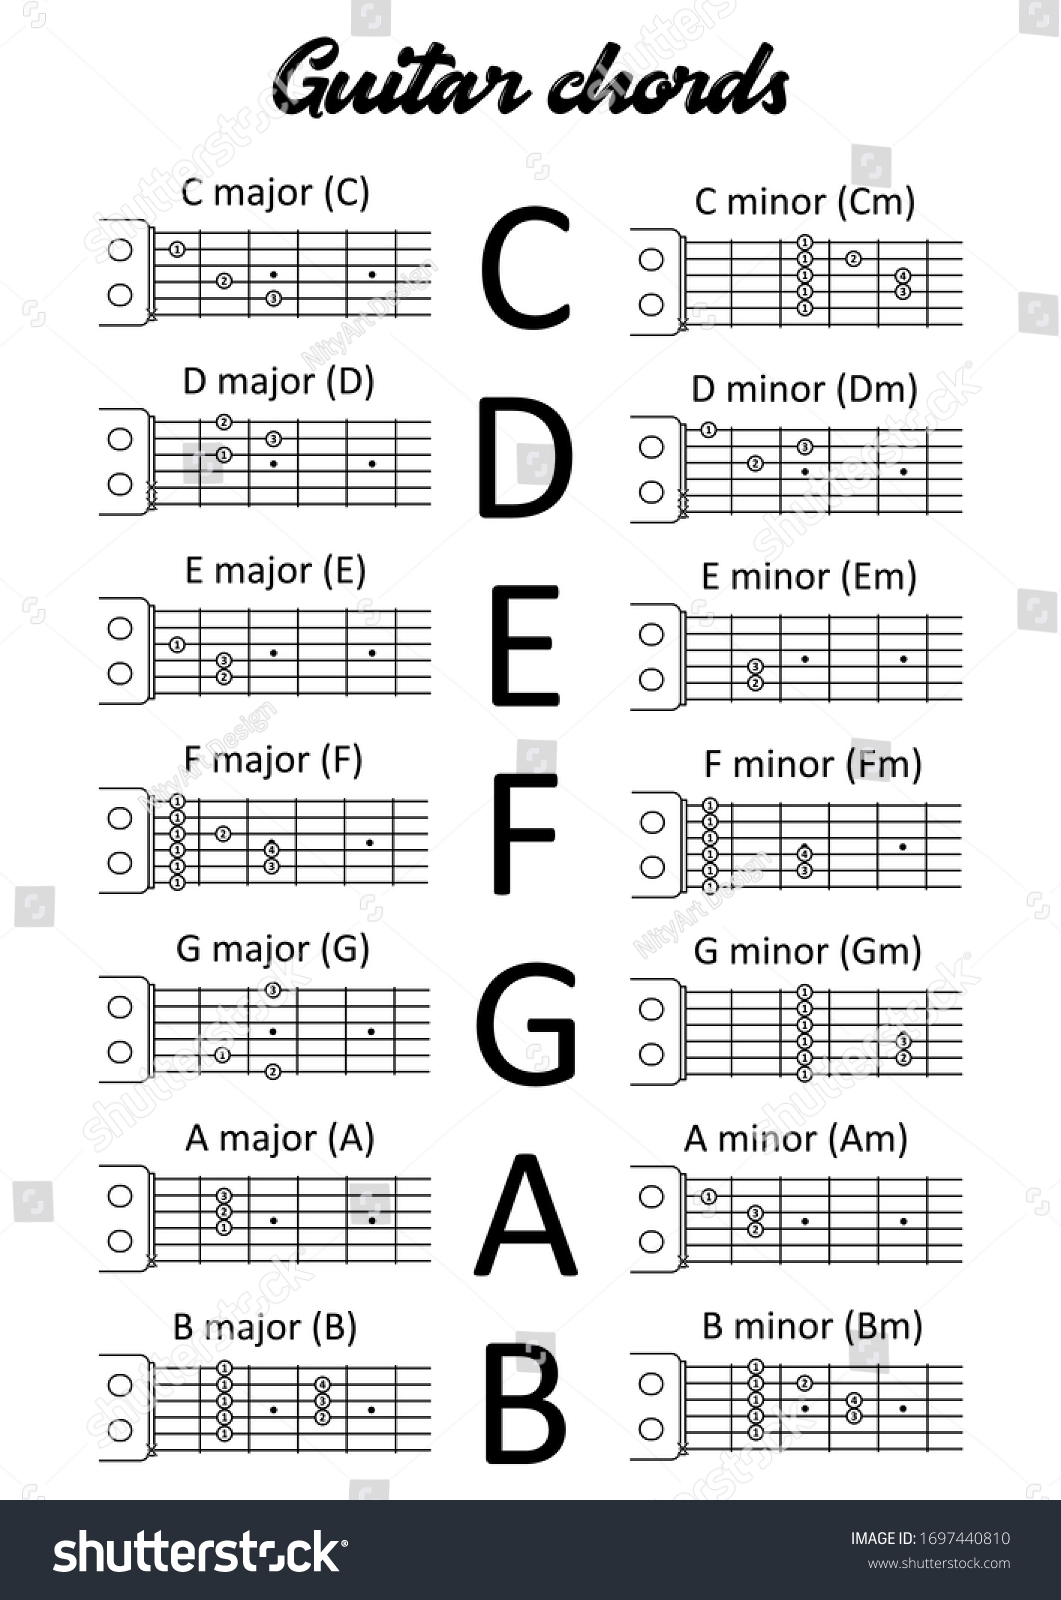 the-basic-guitar-chords-c-d-e-f-g-a-b-and-royalty-free-stock